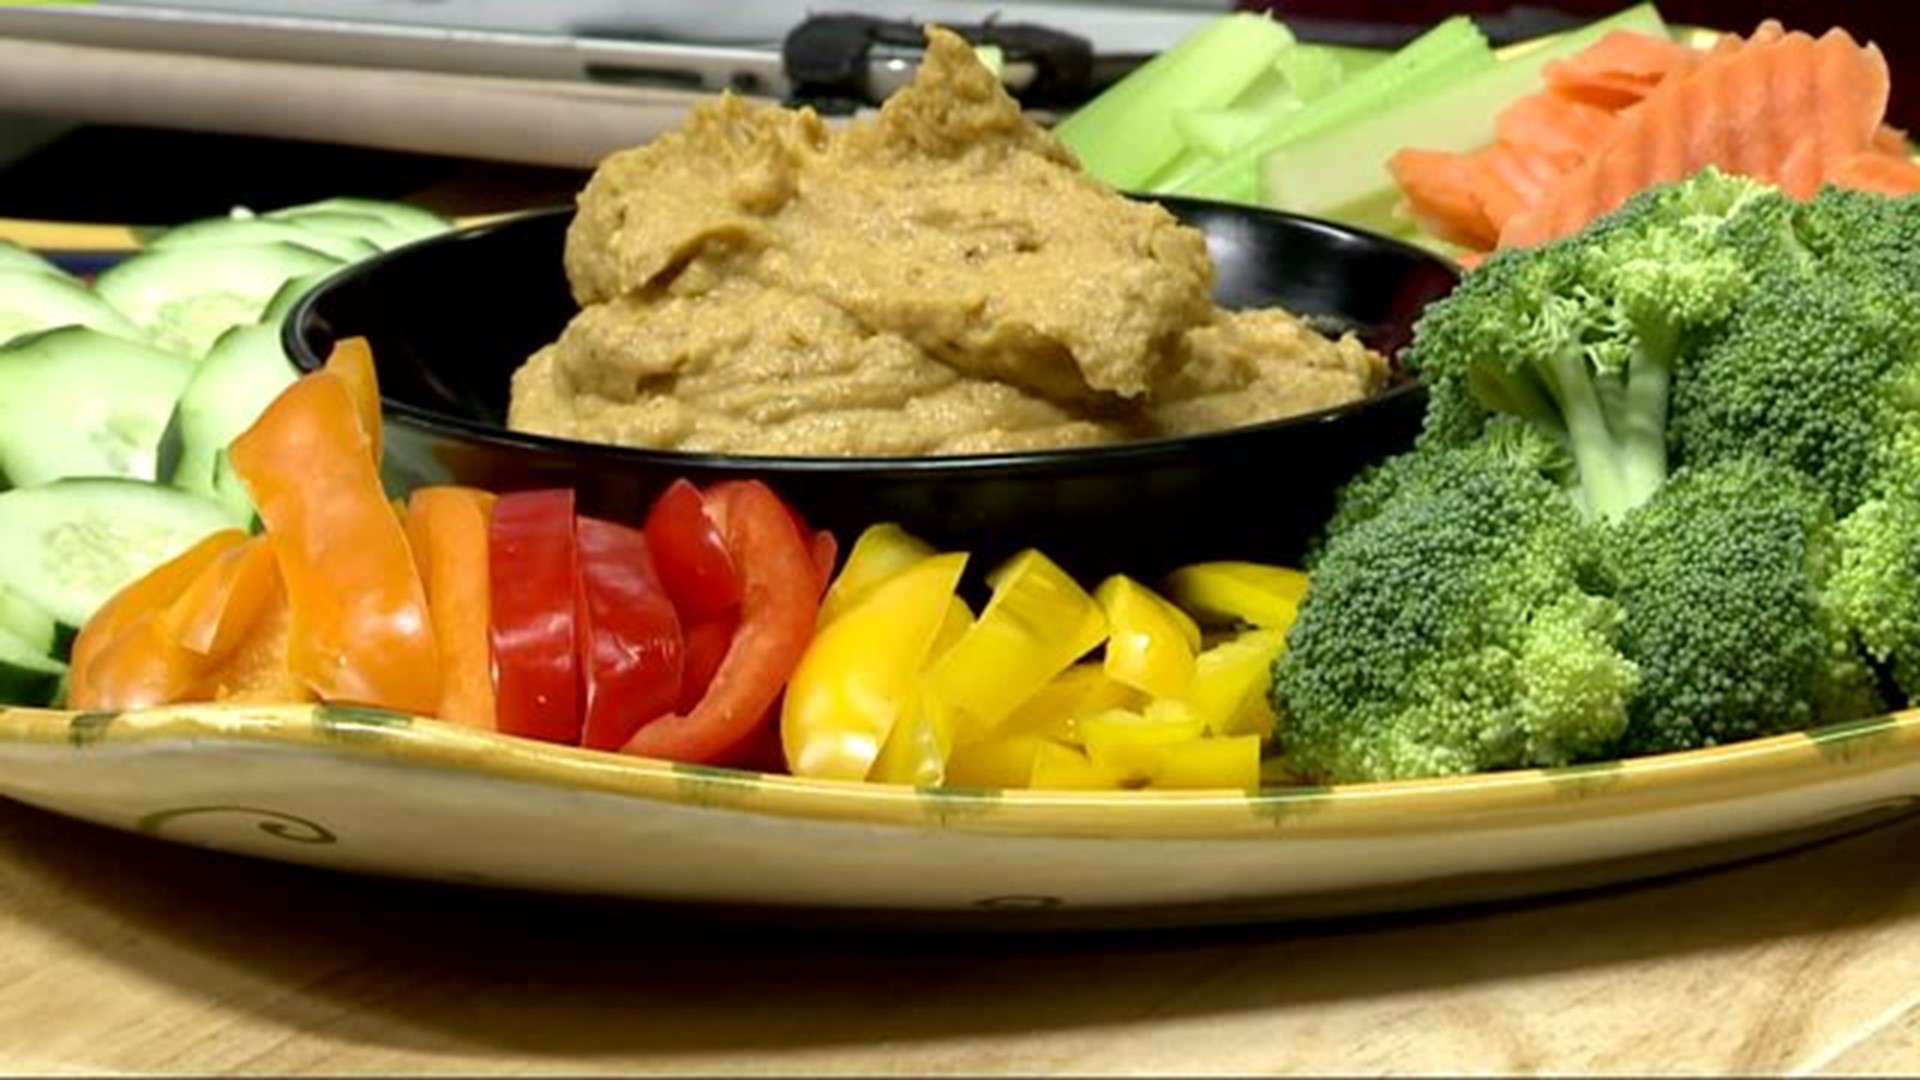 Pumpkin hummus dip is a healthy snack that can save you calories this holiday season